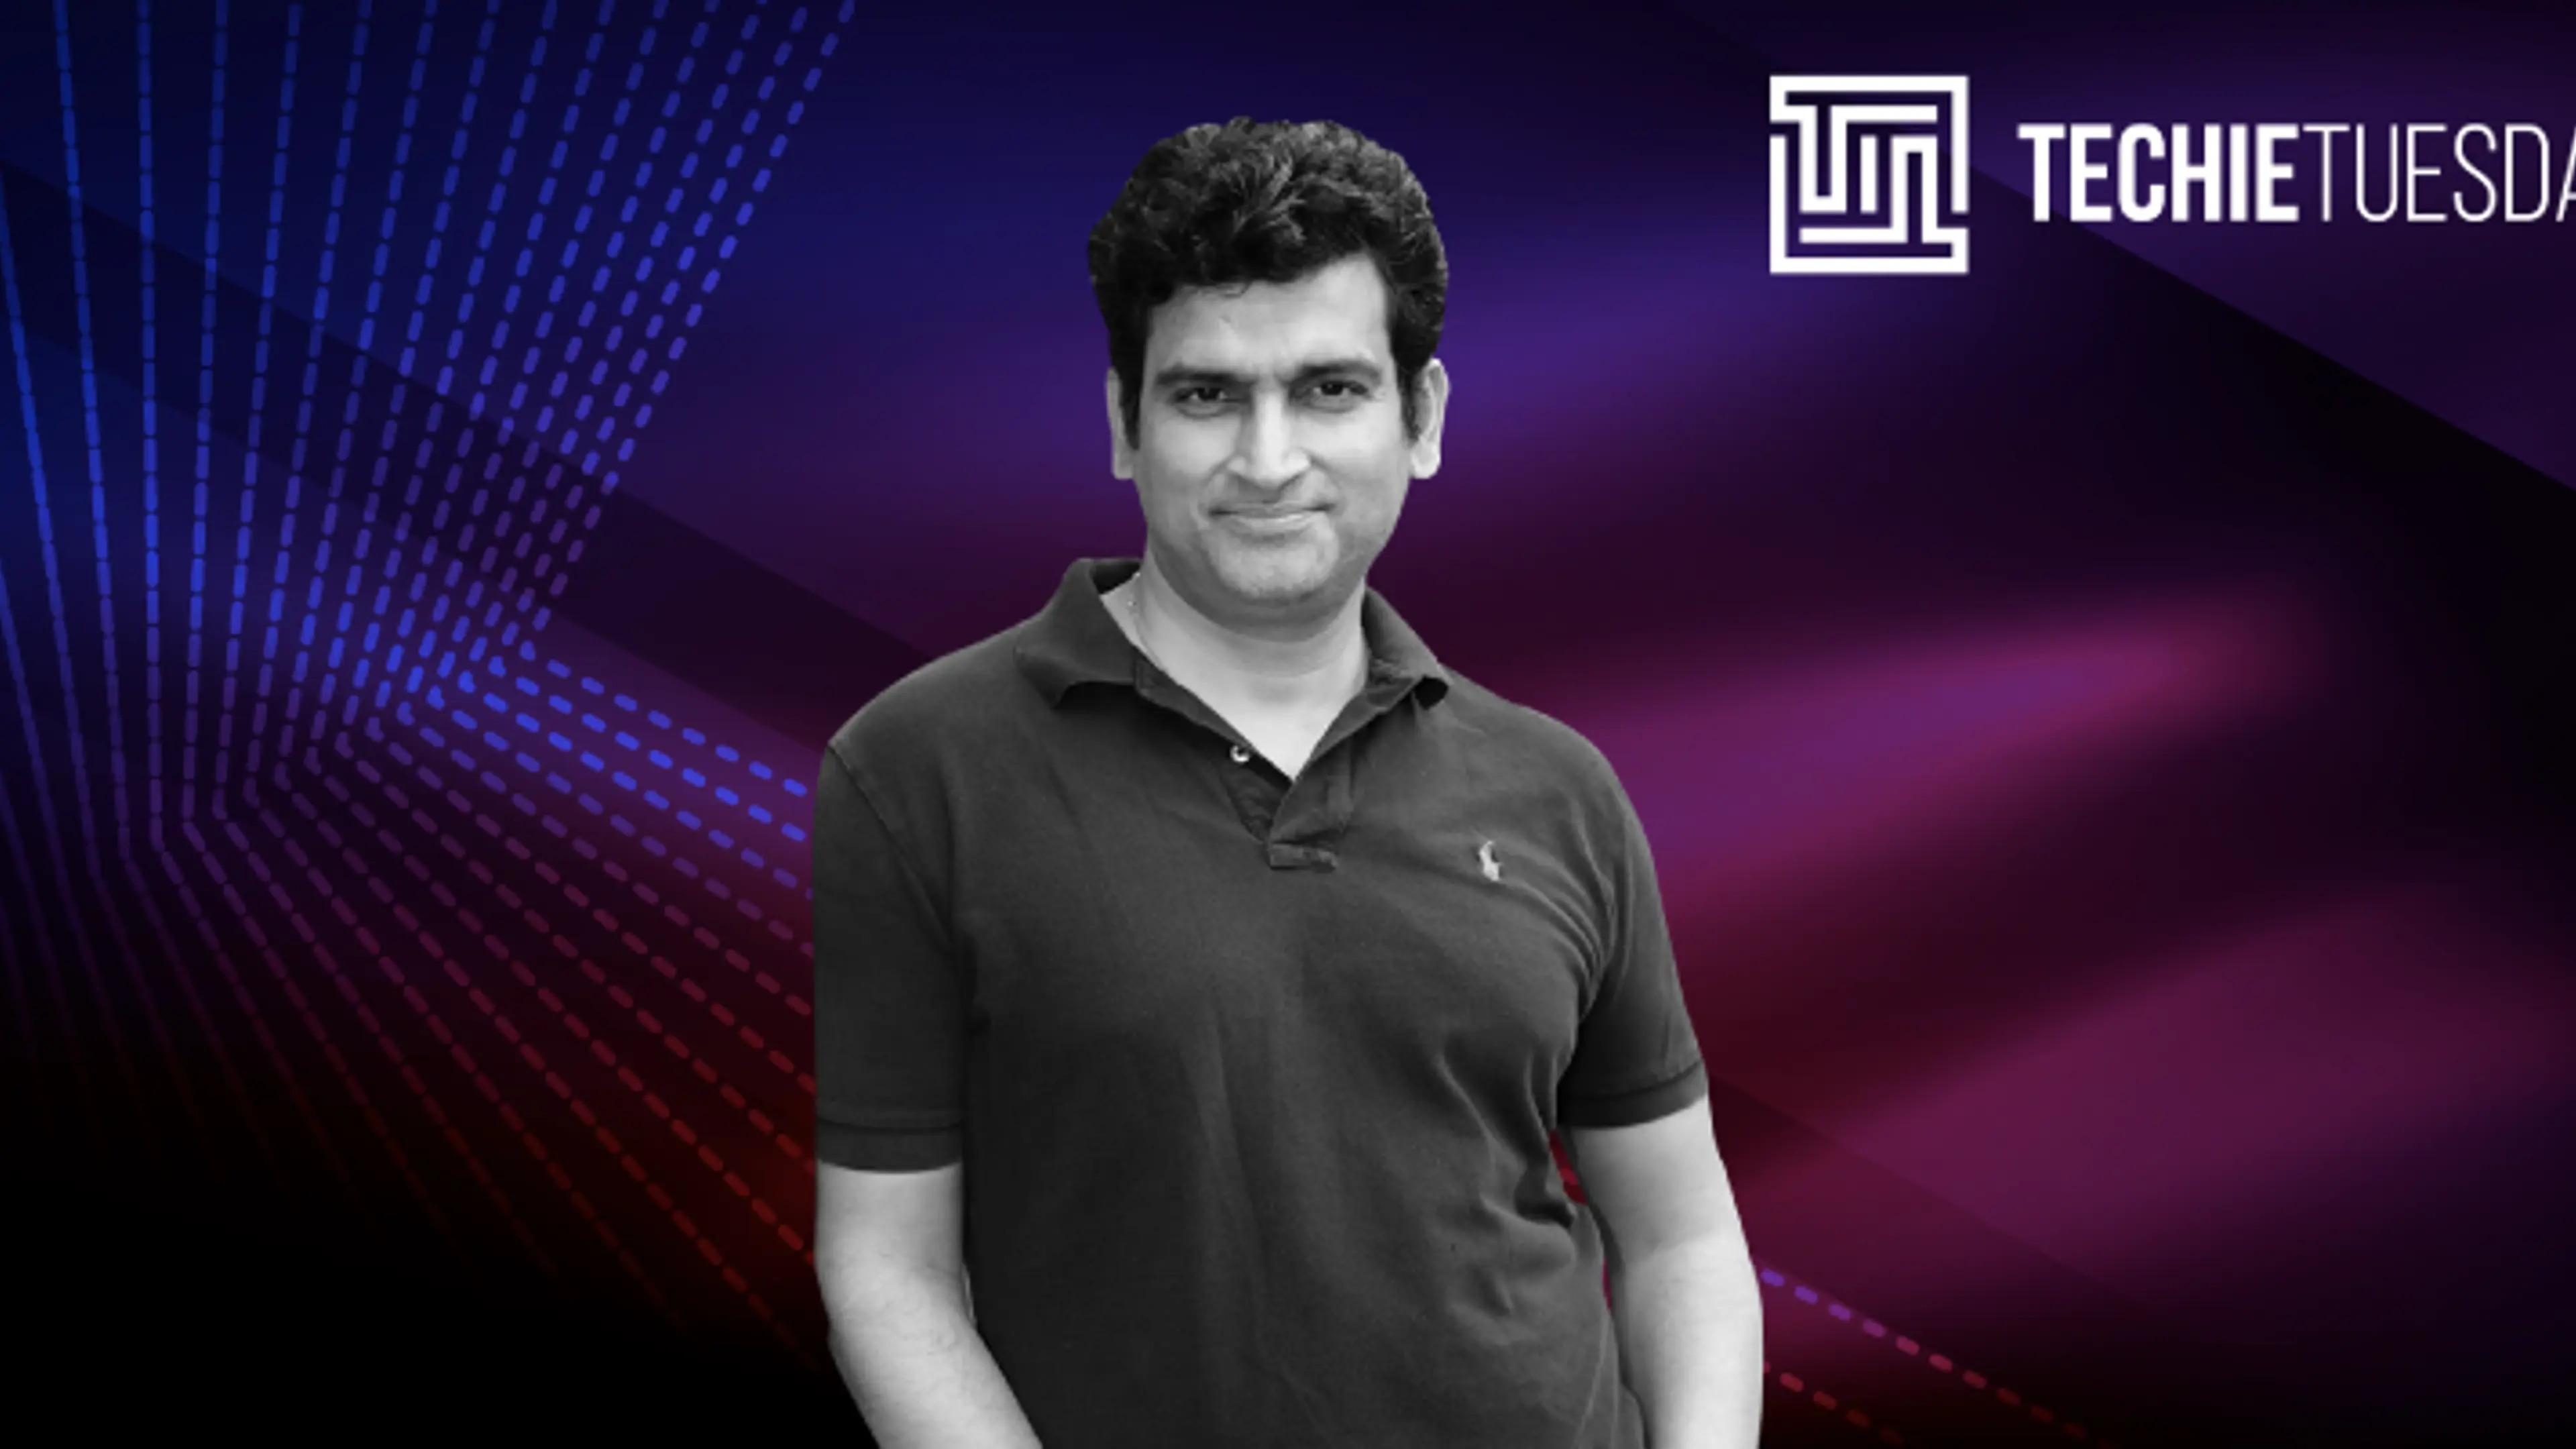 [Techie Tuesday] From launching a search engine to heading product at Facebook and Uber - the journey of ShareChat's Gaurav Mishra